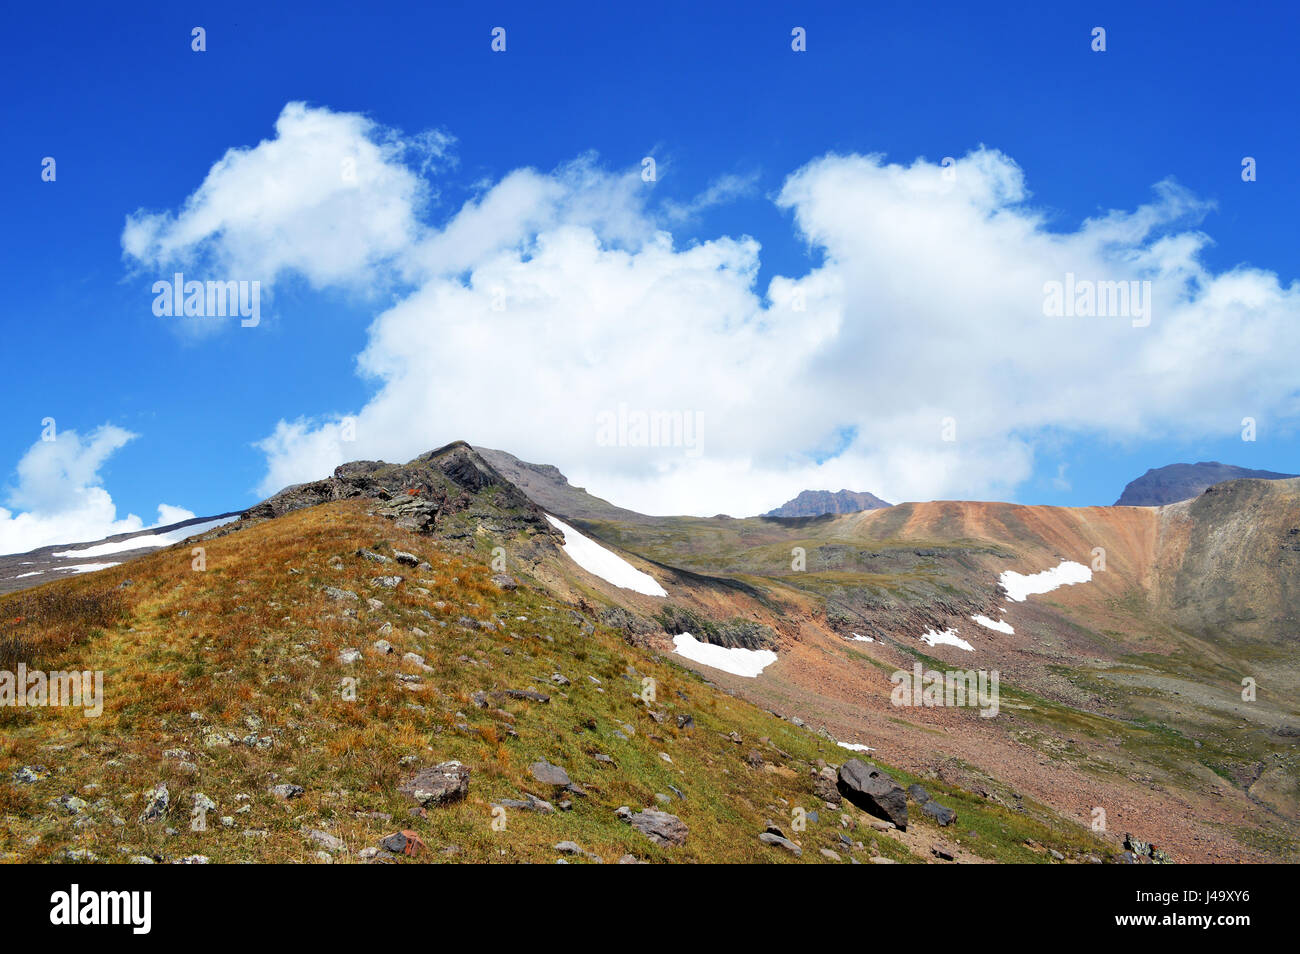 Hiking in the mountains - Mount Aragats in Armenia Stock Photo